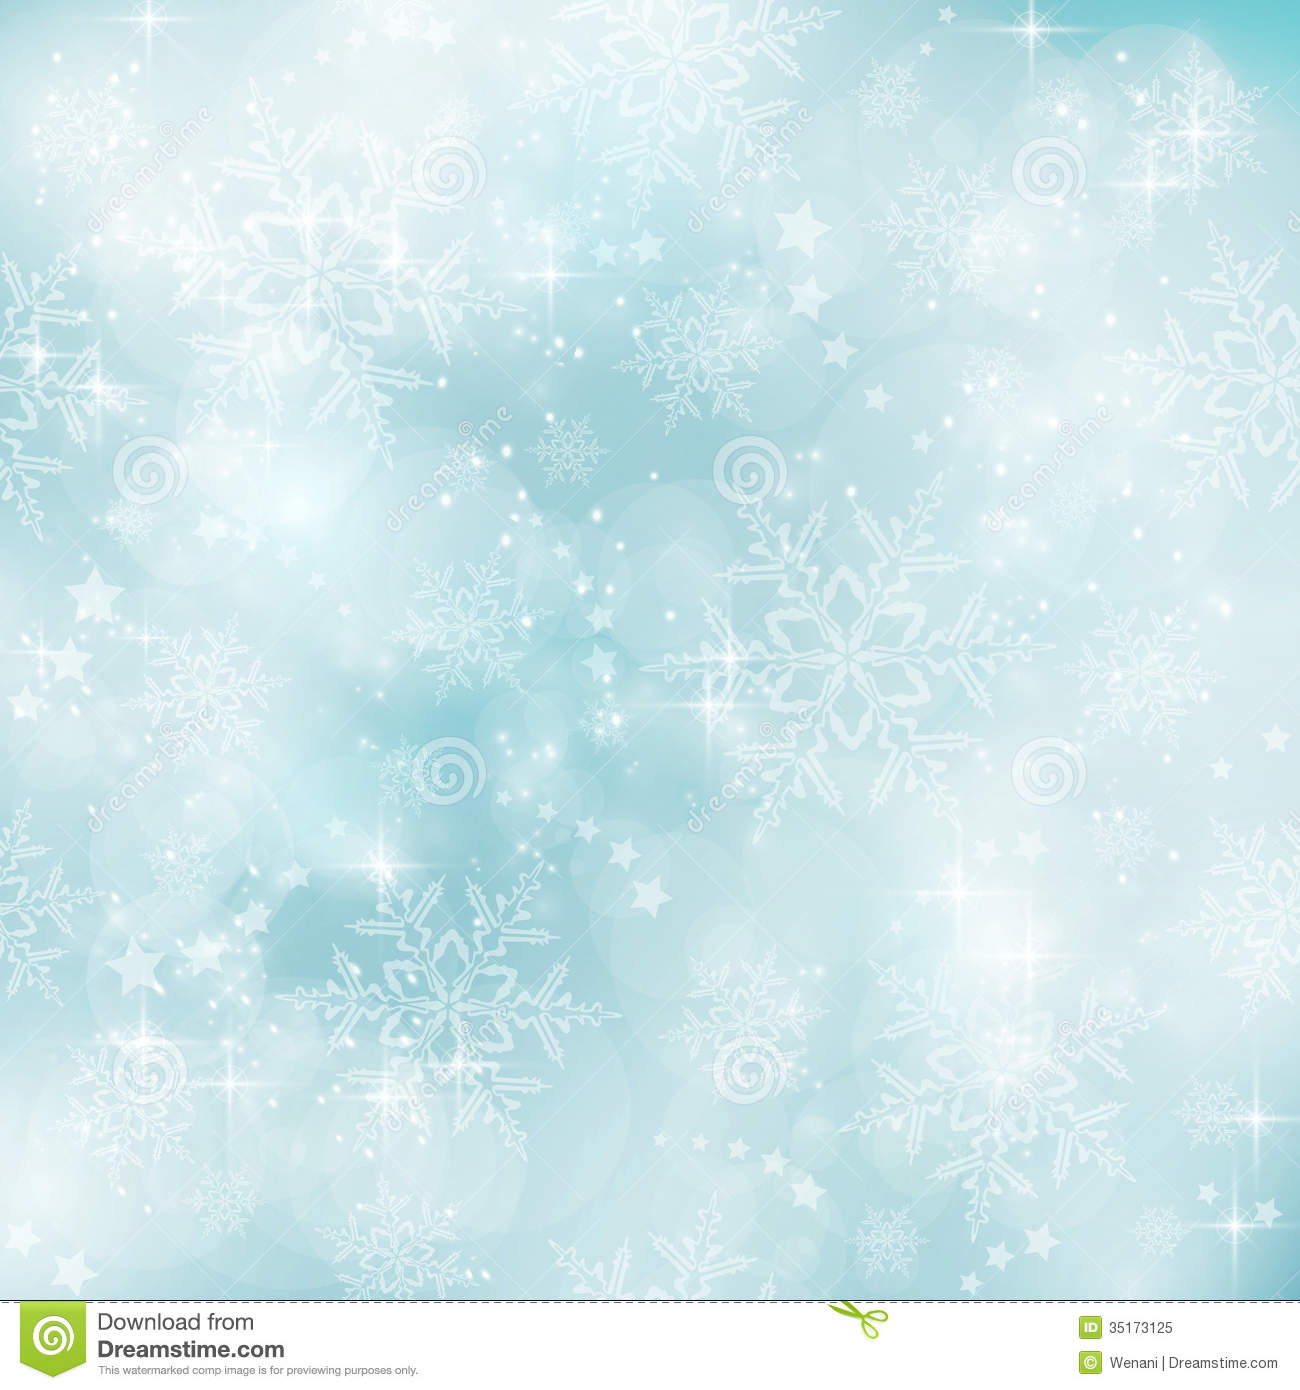 Soft And Blurry Pastel Blue Winter Christmas Patt Royalty Free Stock    